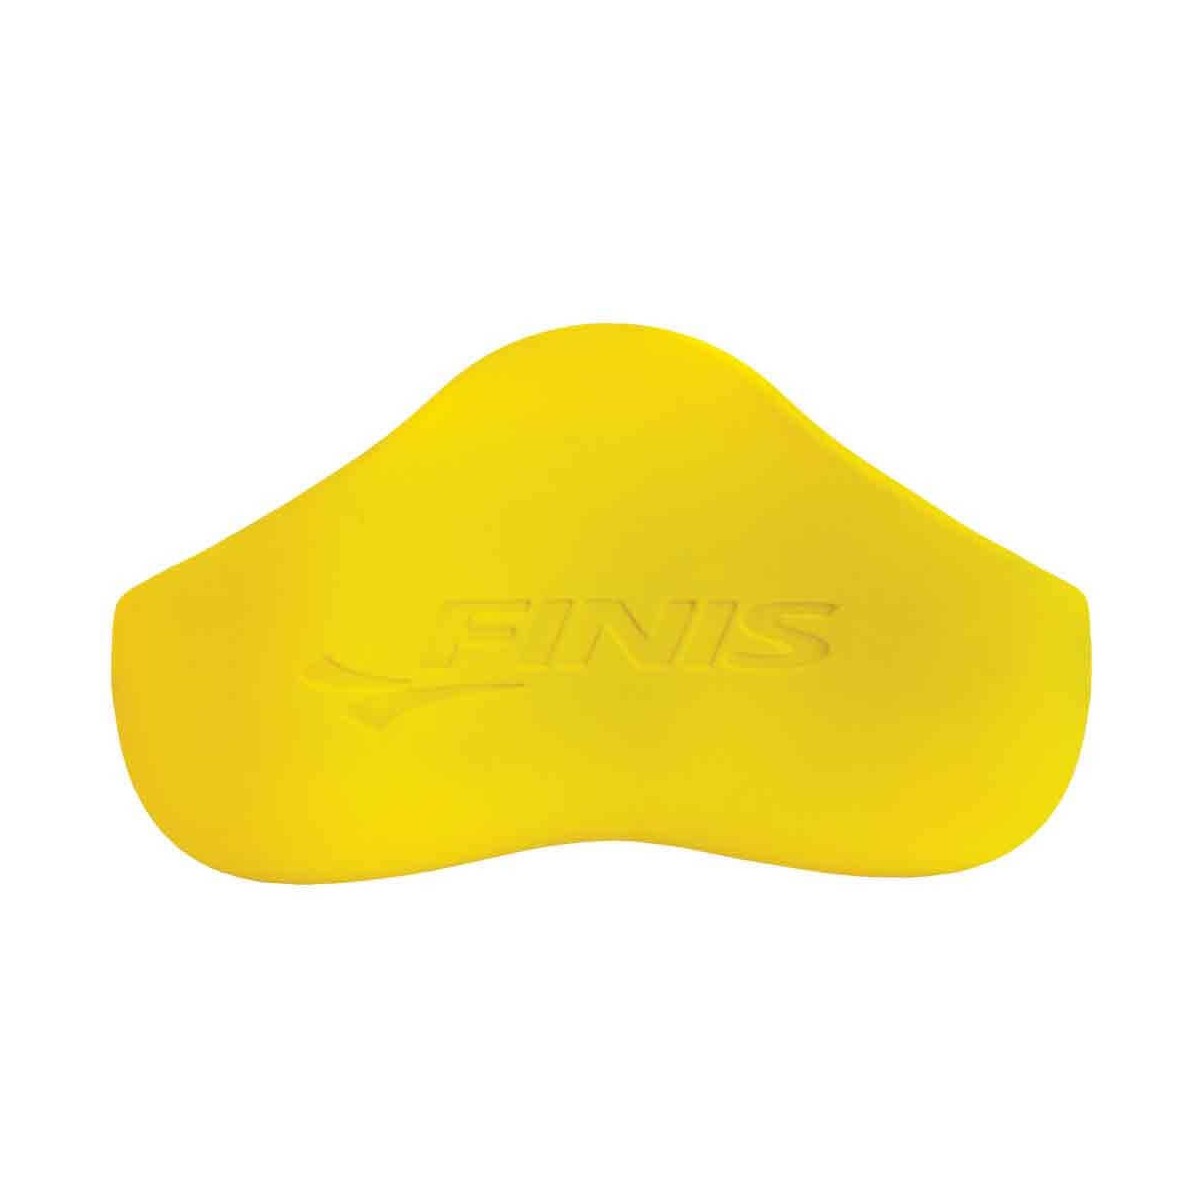 Finis Axis Buoy and Yellow Buoy